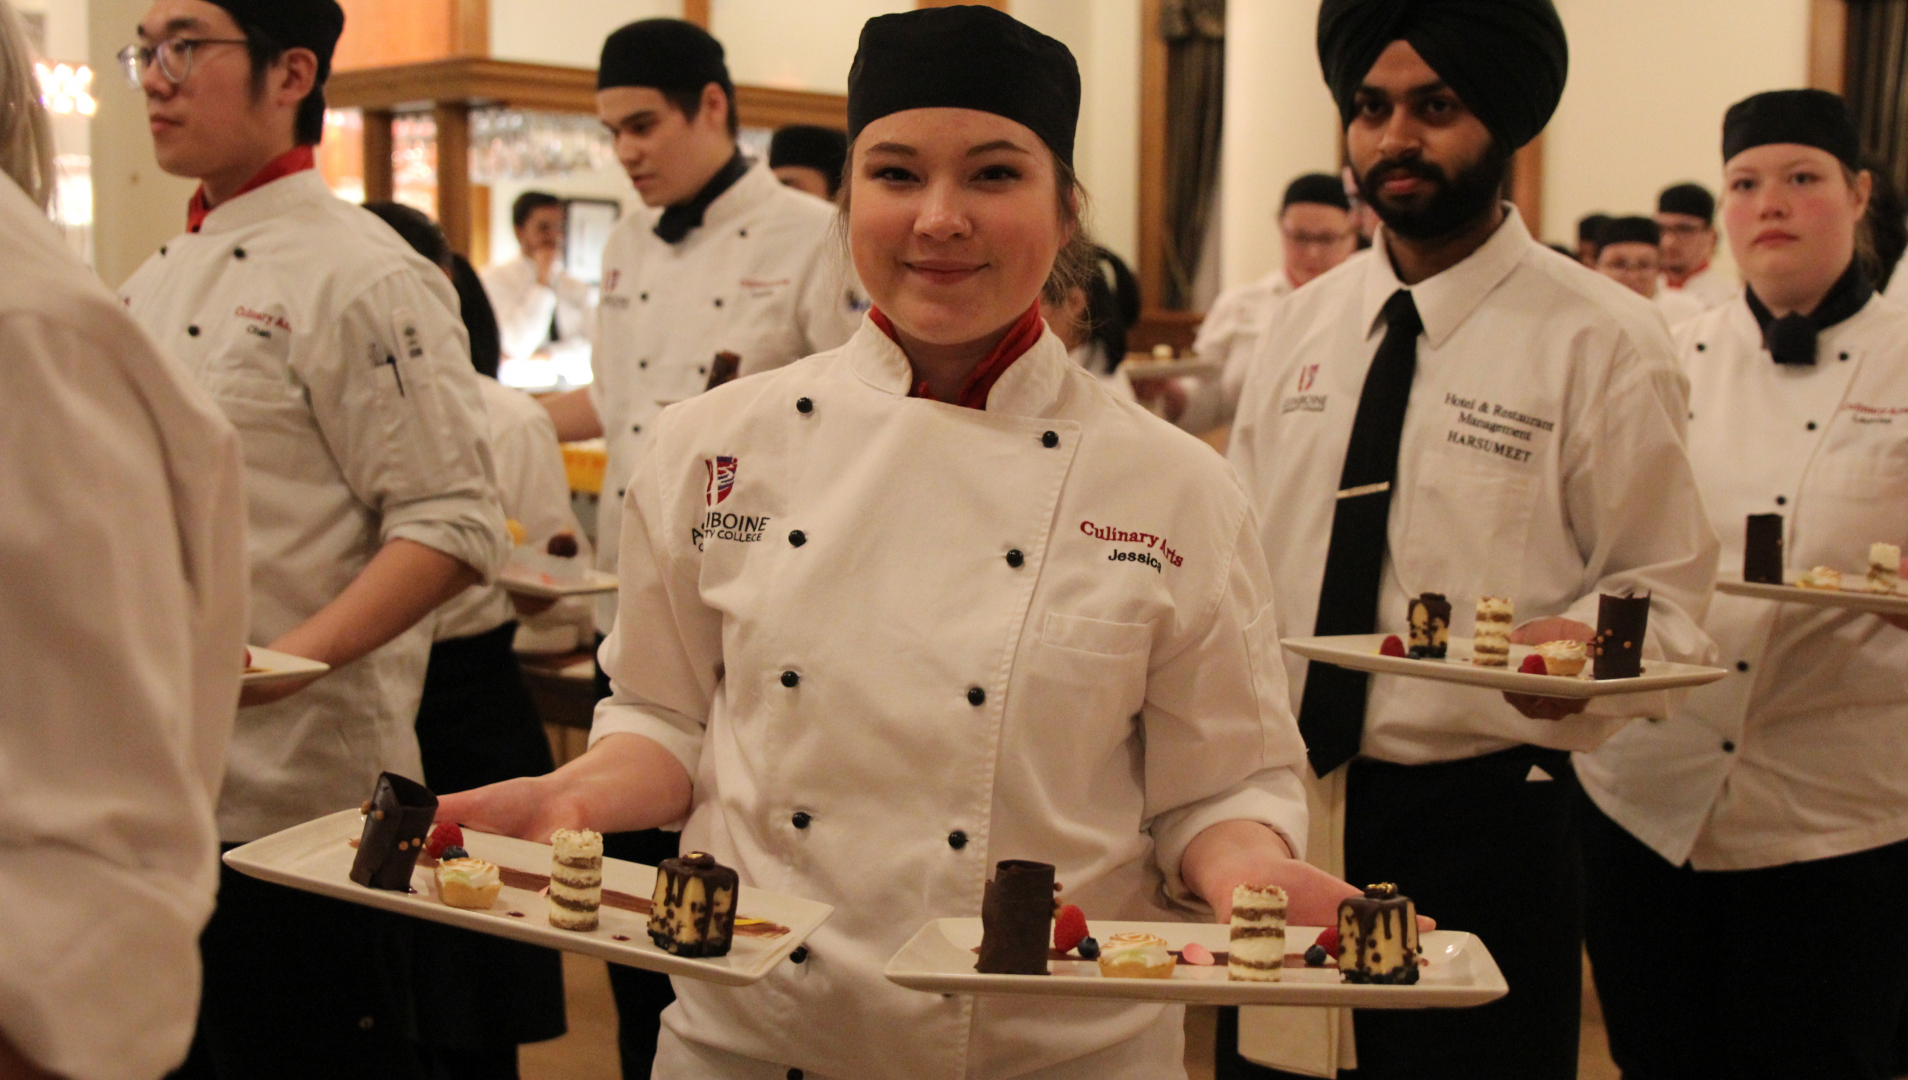 A culinary student prepares to serve dessert at the 2019 Foundation Gala Dinner